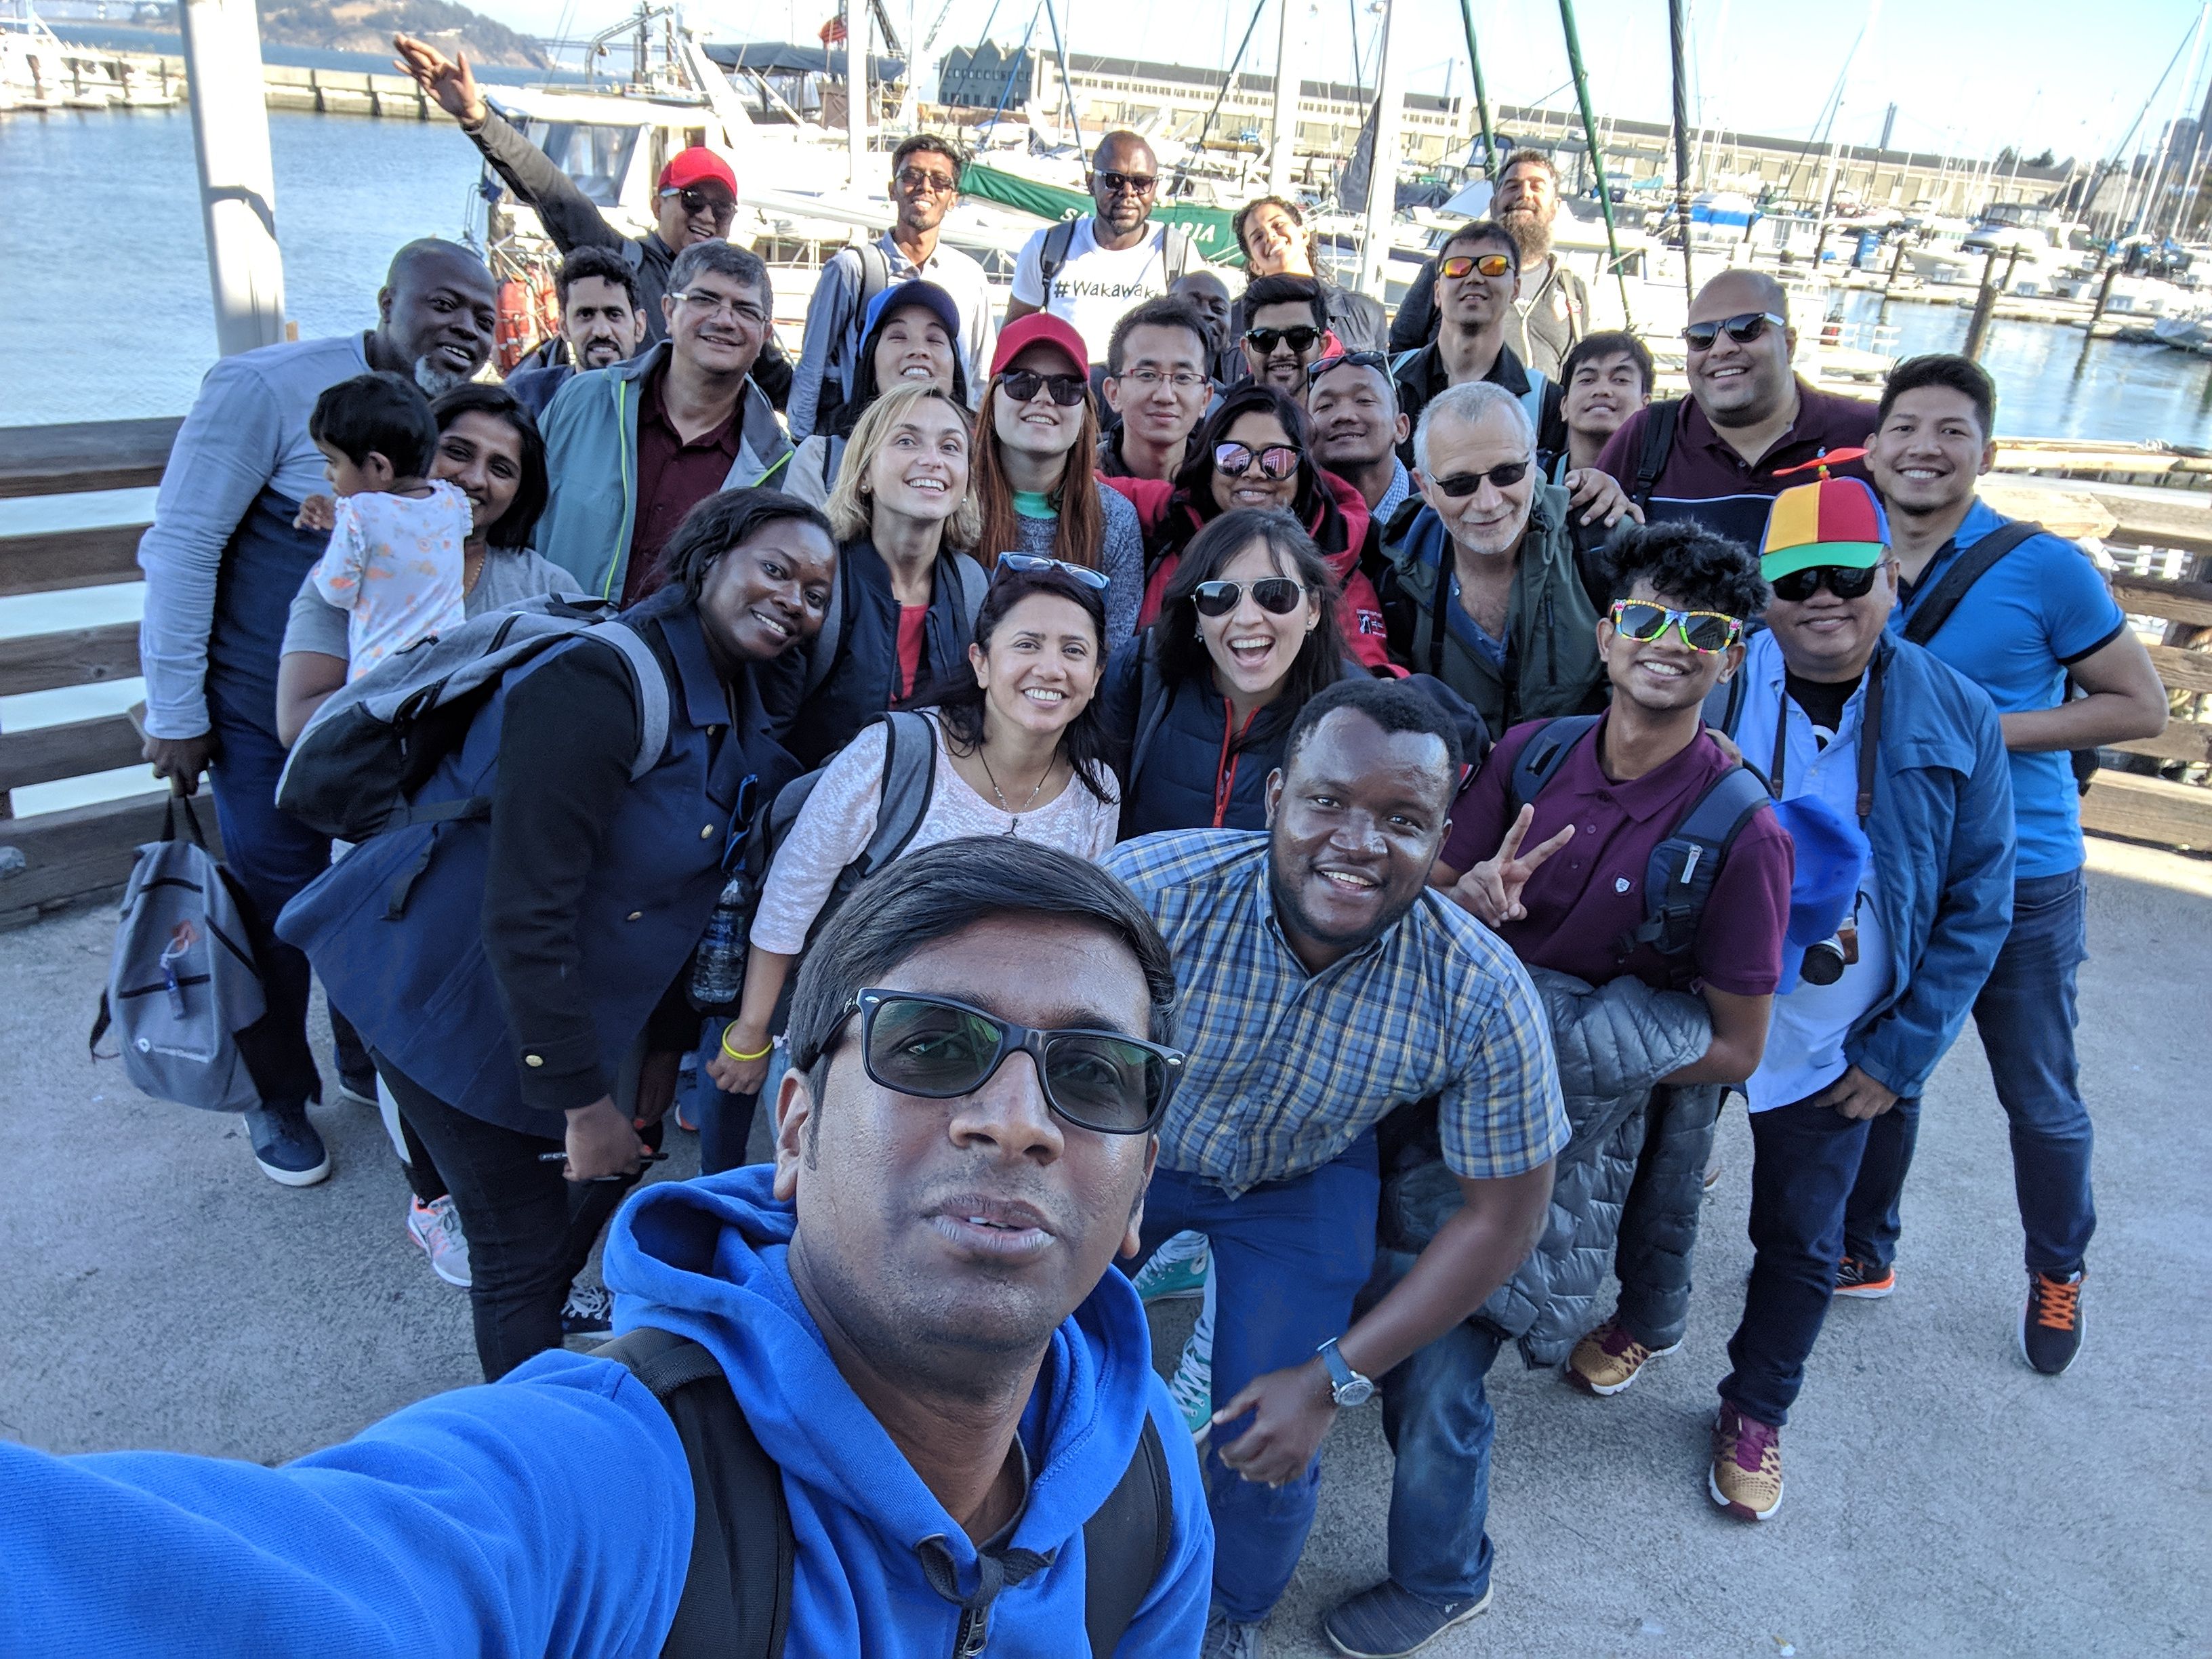 Caption: 2nd Annual Sailing the San Francisco Bay Group Meetup Selfie at Pier 39 Dock C, October 19, 2018. Photo: Sri Lanka Local Guide & Connect Moderator @IlankovanT